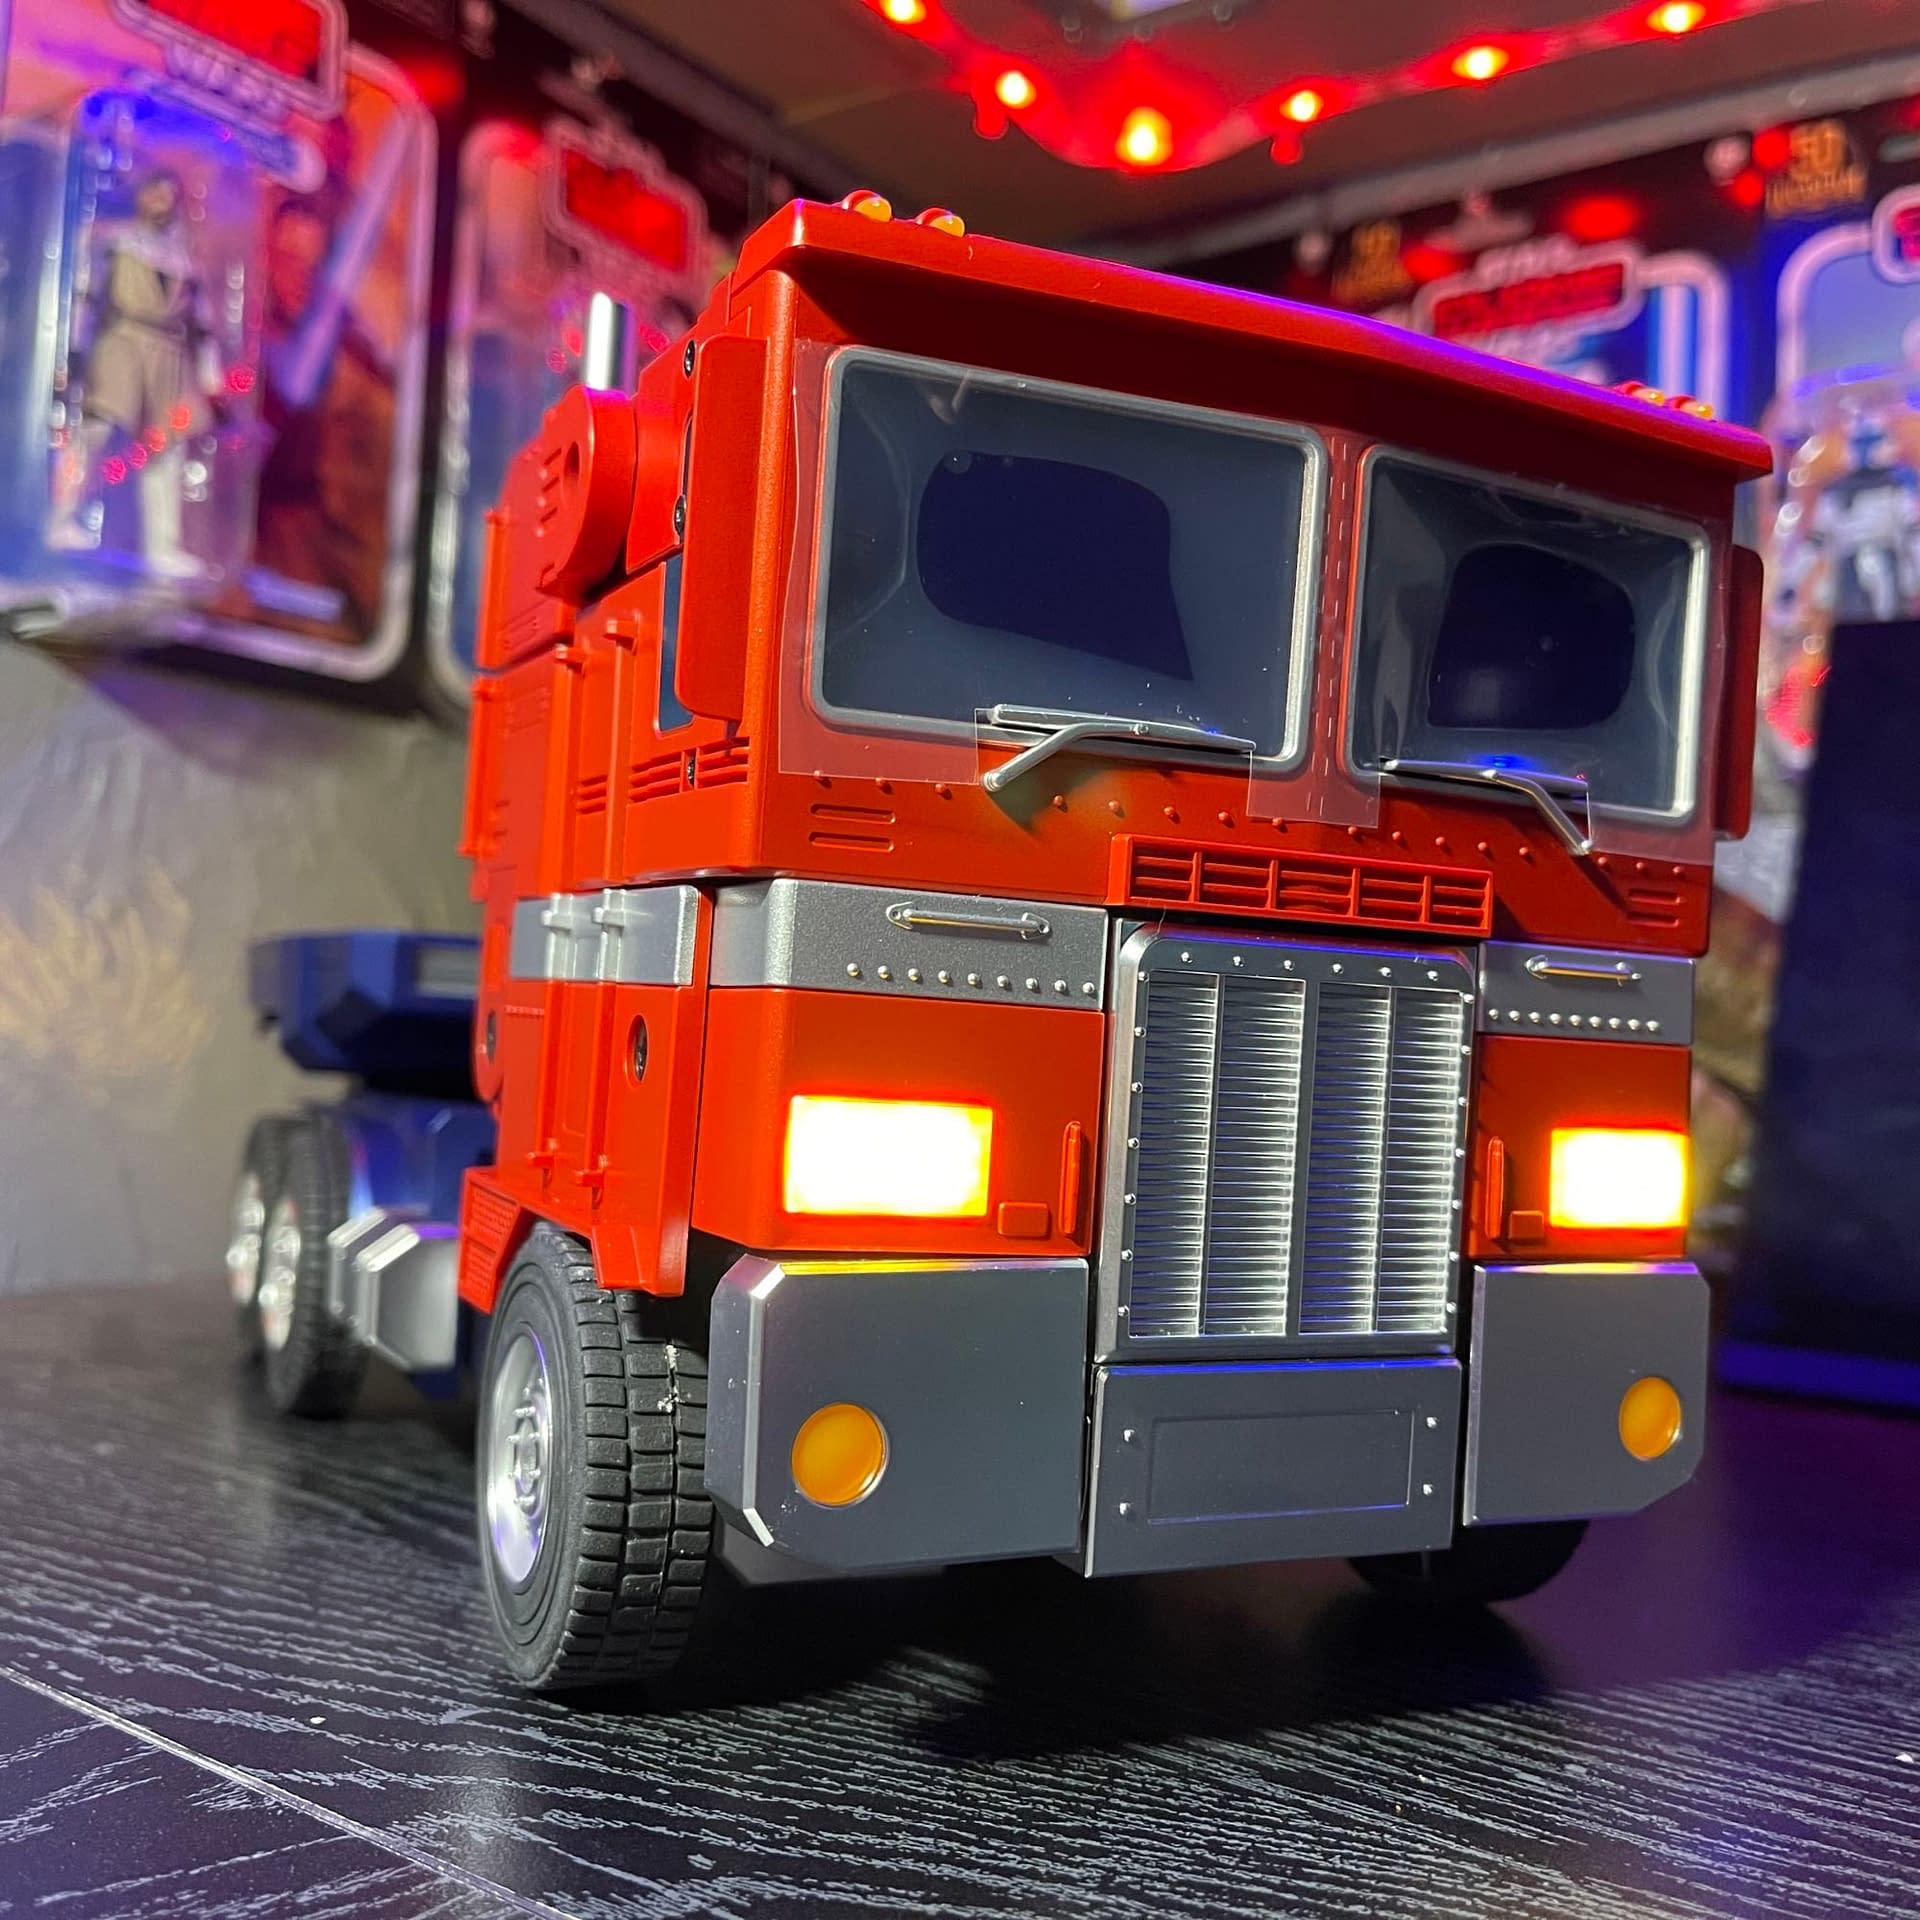 The Best Transformers 2022 Holiday Gift is Robosen's Optimus Prime